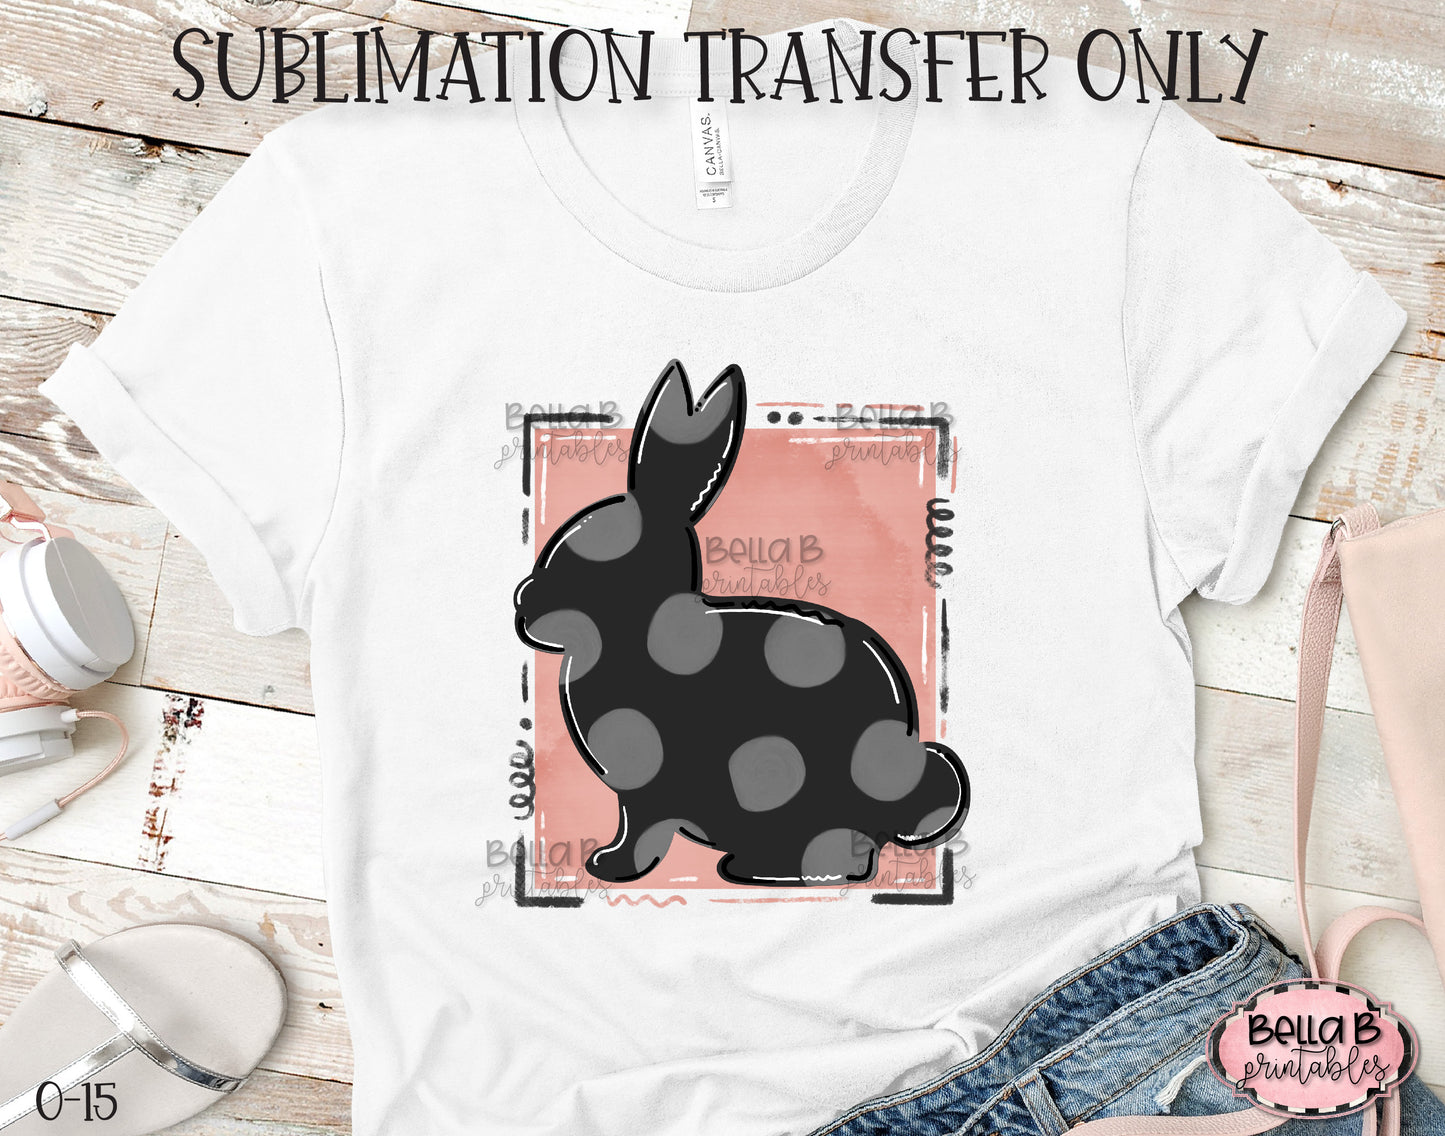 Hand Drawn Easter Bunny Sublimation Transfer, Ready To Press, Heat Press Transfer, Sublimation Print